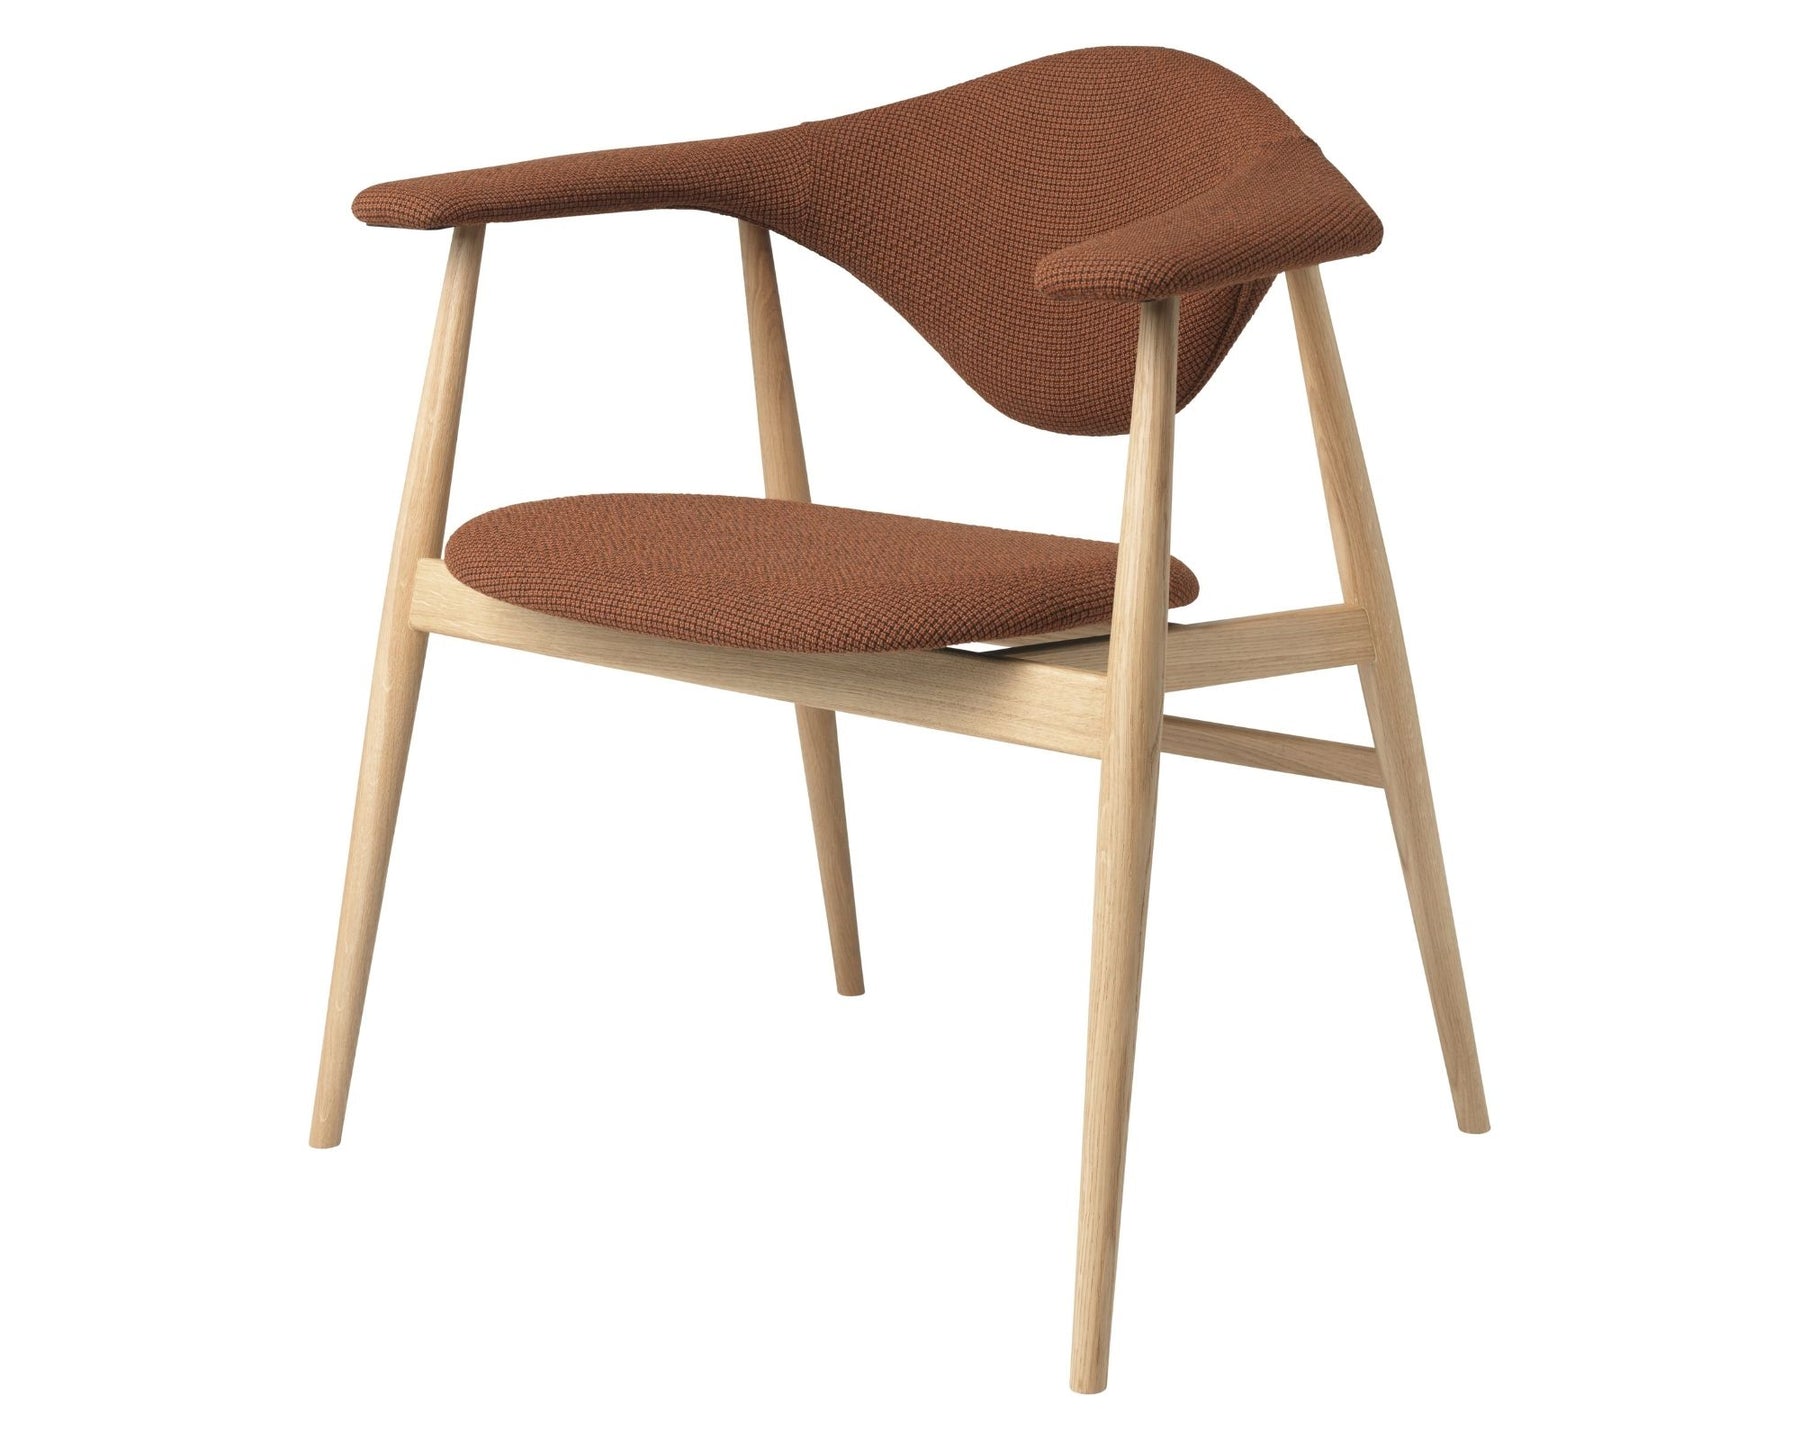 Upholstered Wood Dining Chair | DSHOP